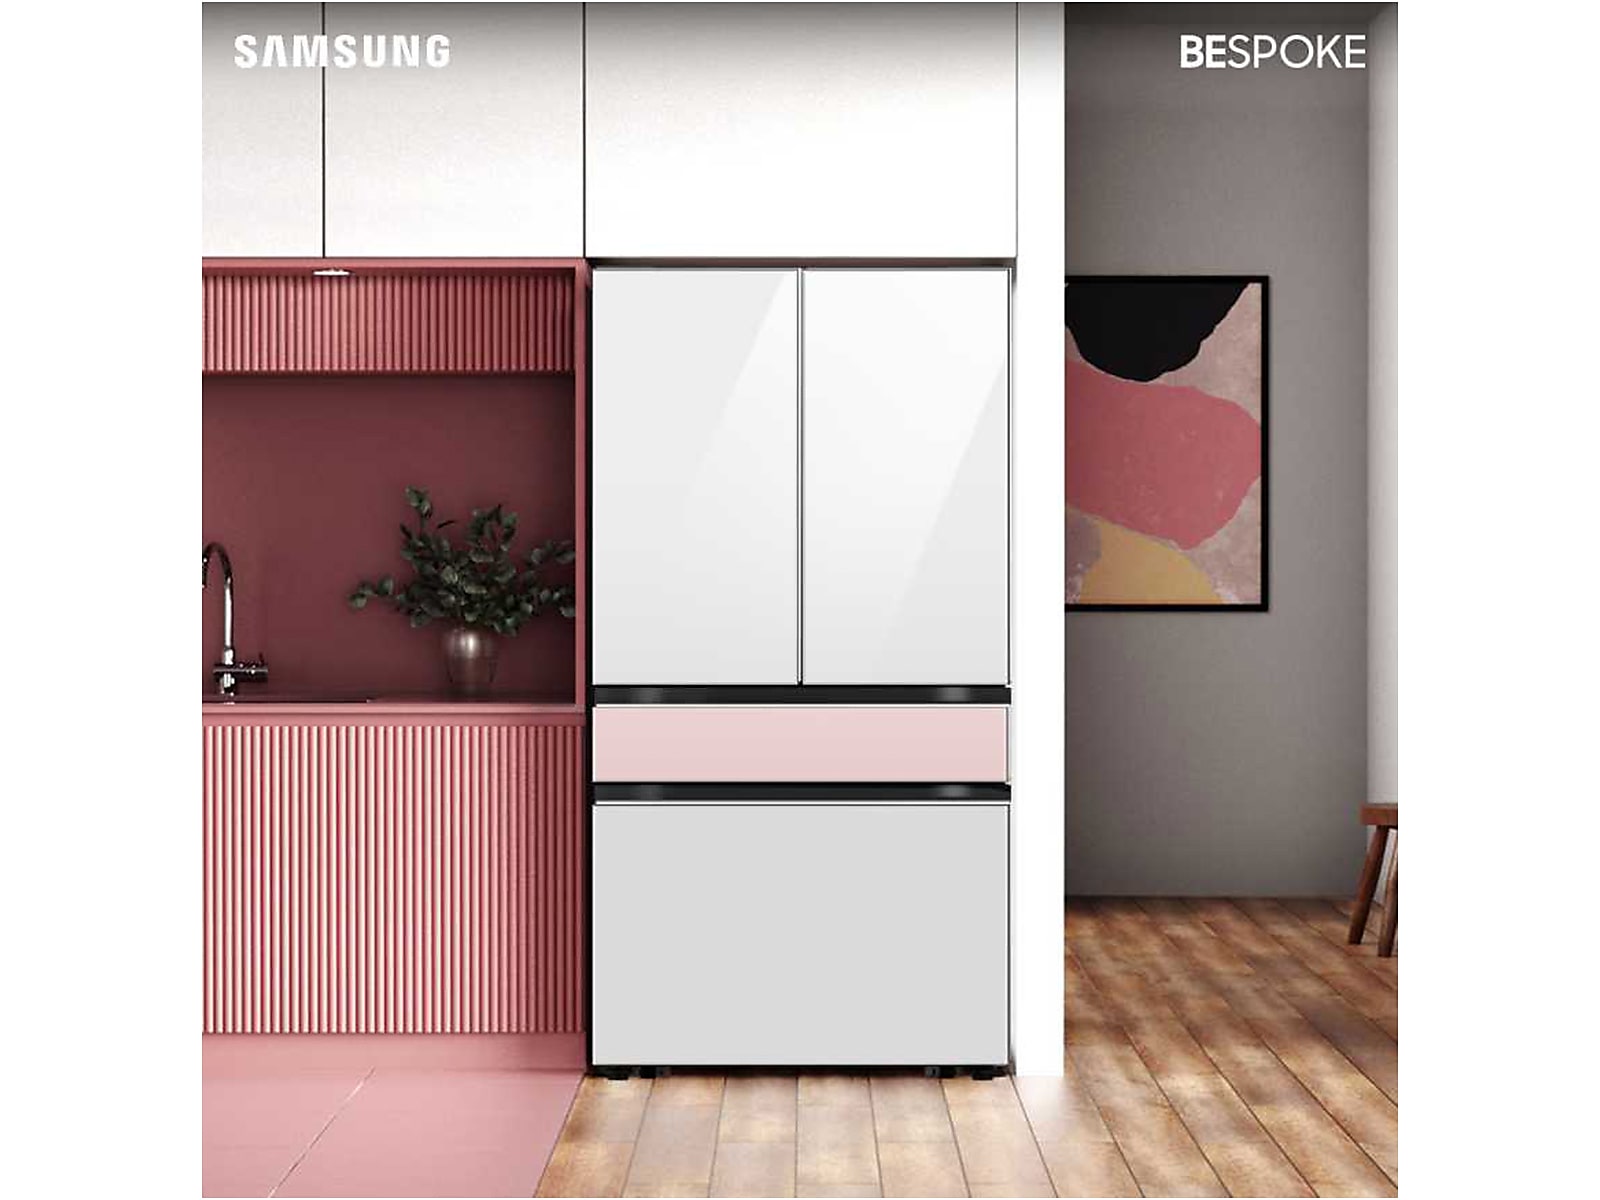 Samsung Bespoke 4-Door French Door Refrigerator (29 cu. ft.) with AutoFill Water Pitcher and Customizable Door Panel Colors in White Glass with Pink Glass Middle Panel photo